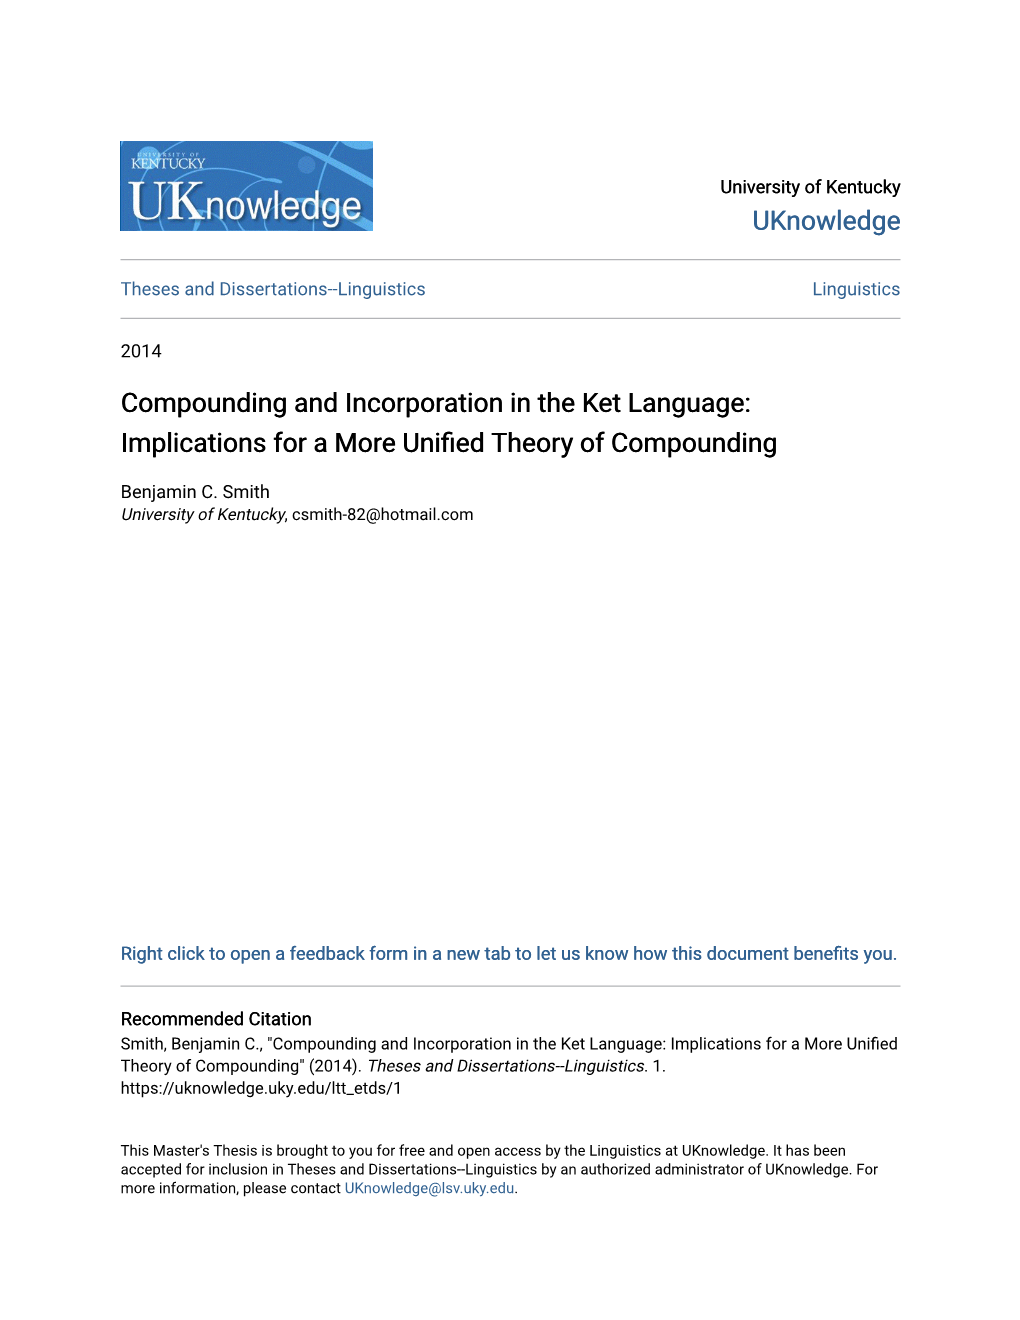 Compounding and Incorporation in the Ket Language: Implications for a More Unified Theory of Compounding